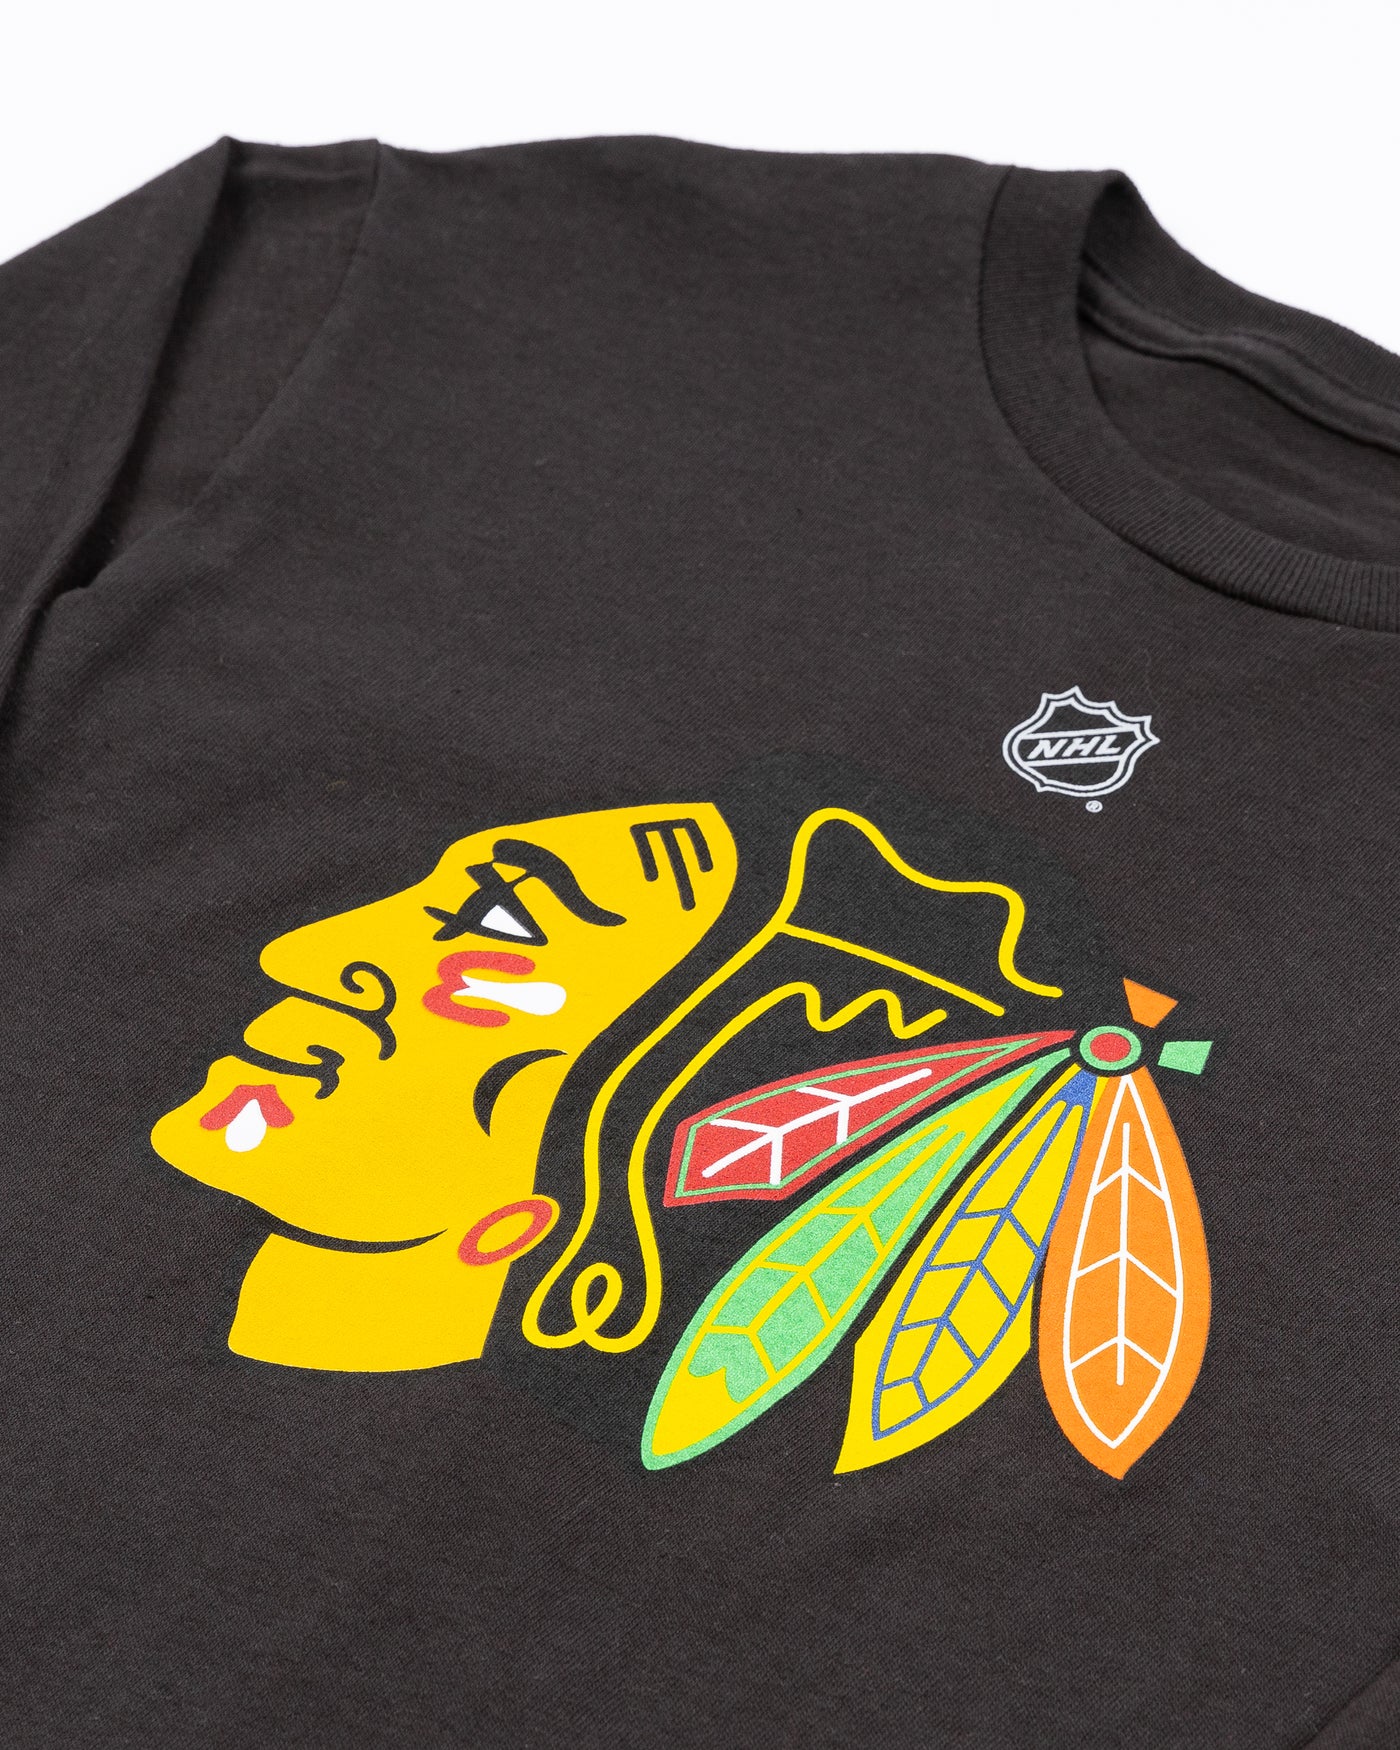 black Chicago Blackhawks youth long sleeve tee with primary logo across front - detail lay flat